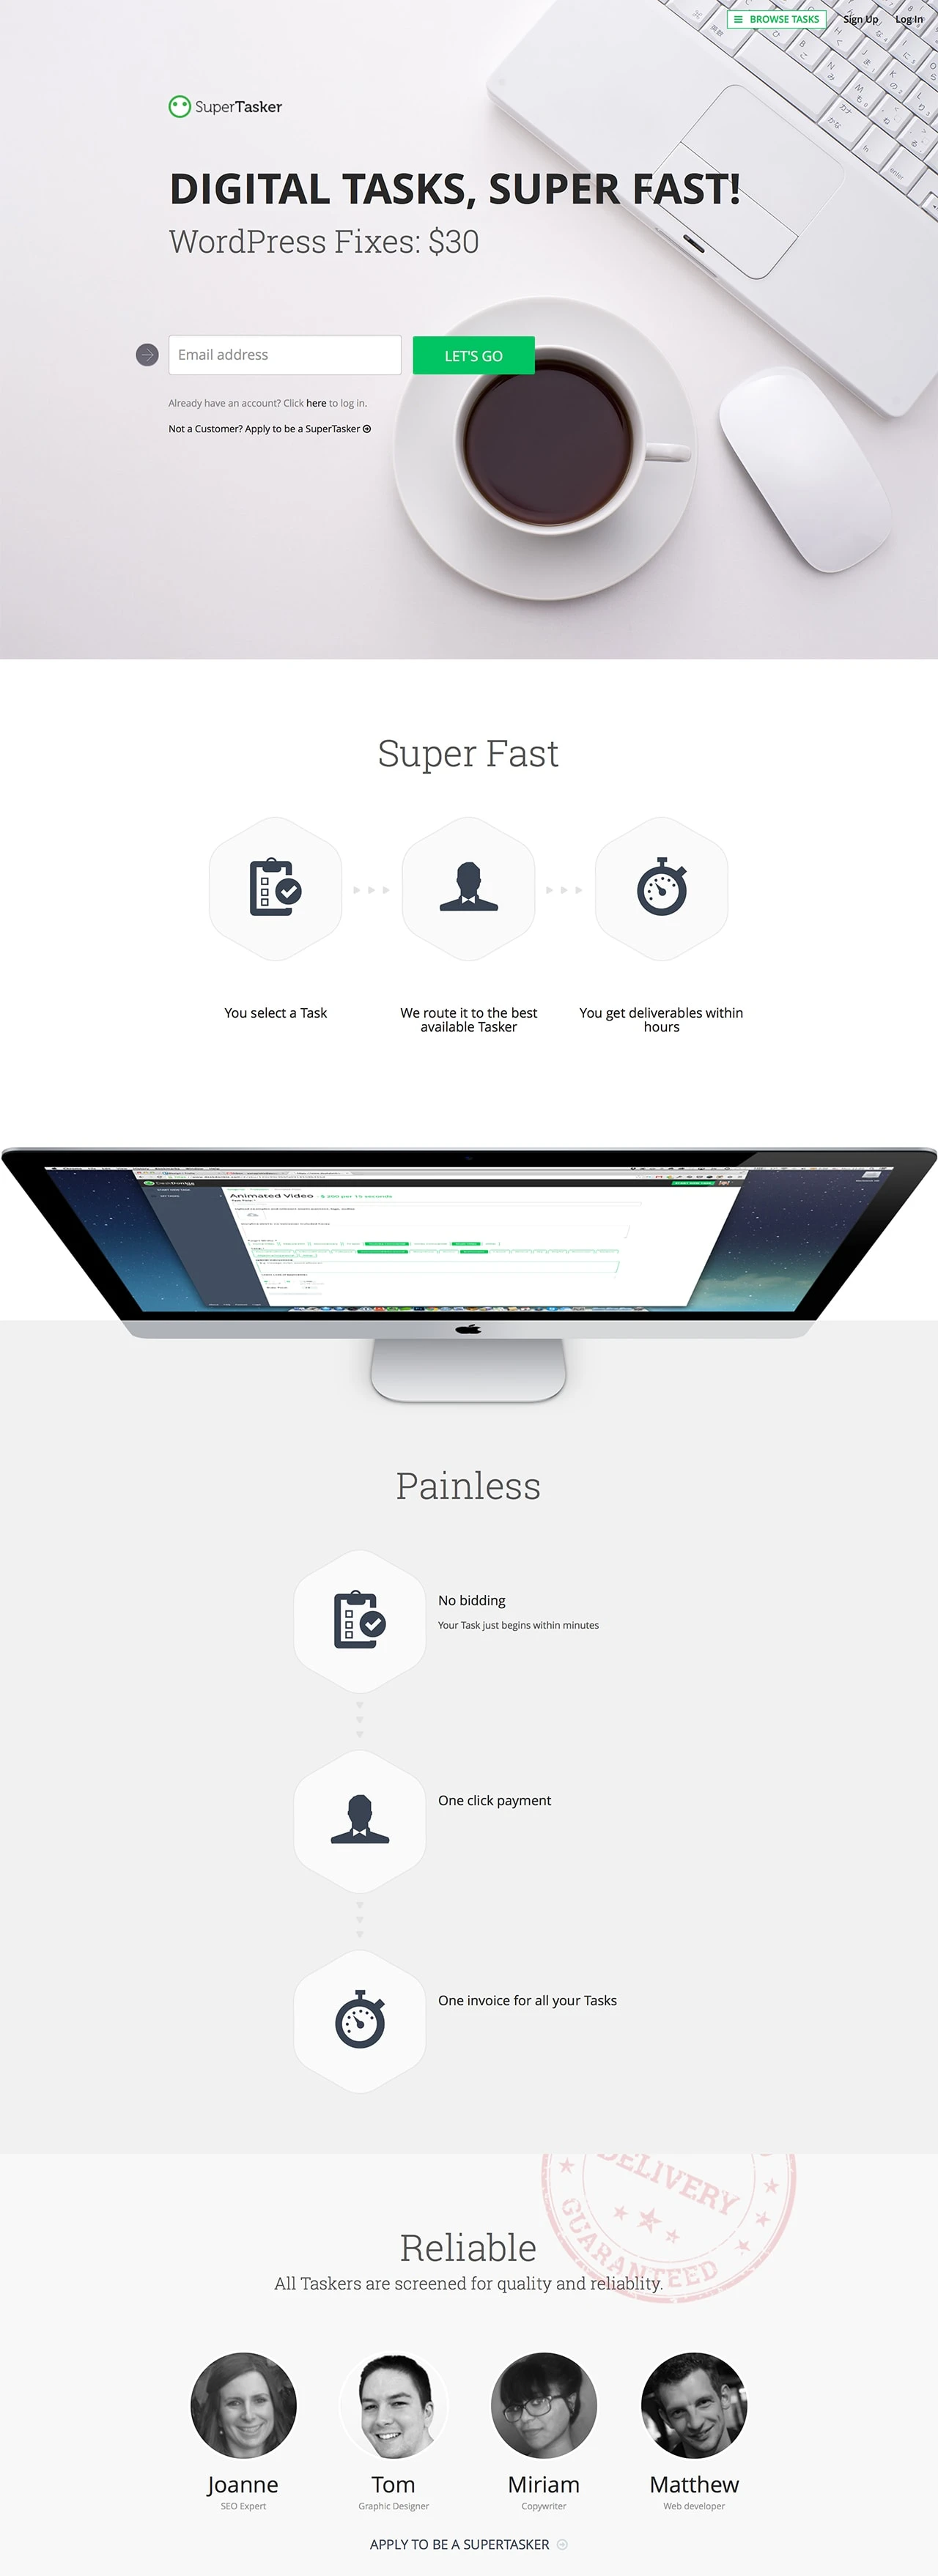 SuperTasker Landing Page Example: SuperTasker's vision is to be your 'Digital HelpDesk in the Cloud', allowing you to outsource and manage high volumes of small tasks, super fast, to a pool of curated experts.